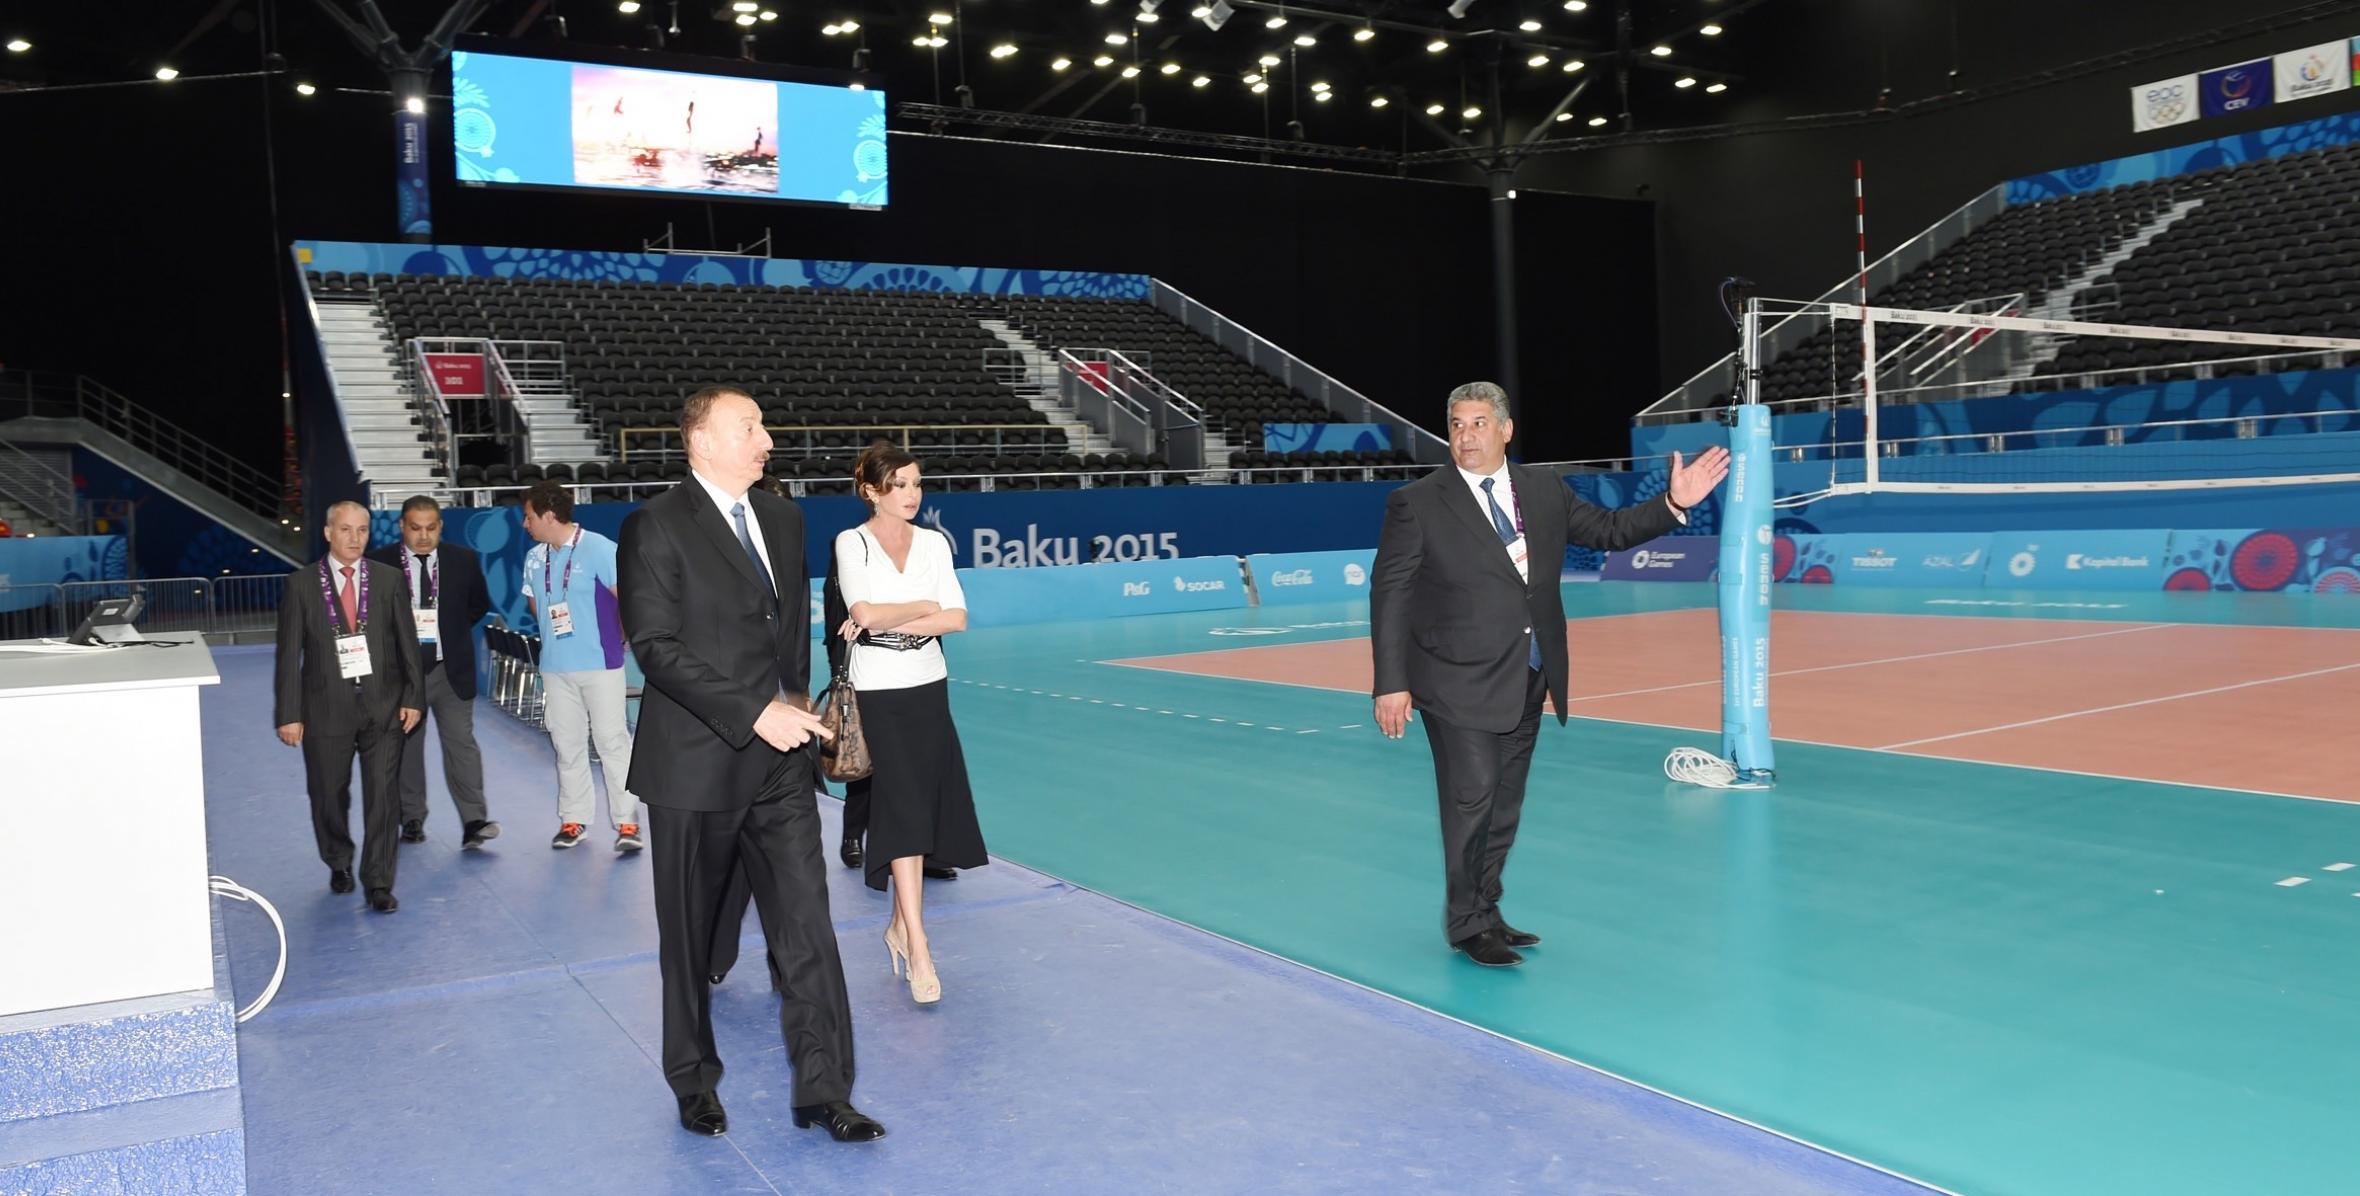 Ilham Aliyev reviewed Baku Crystal Hall that will host several competitions during the First European Games